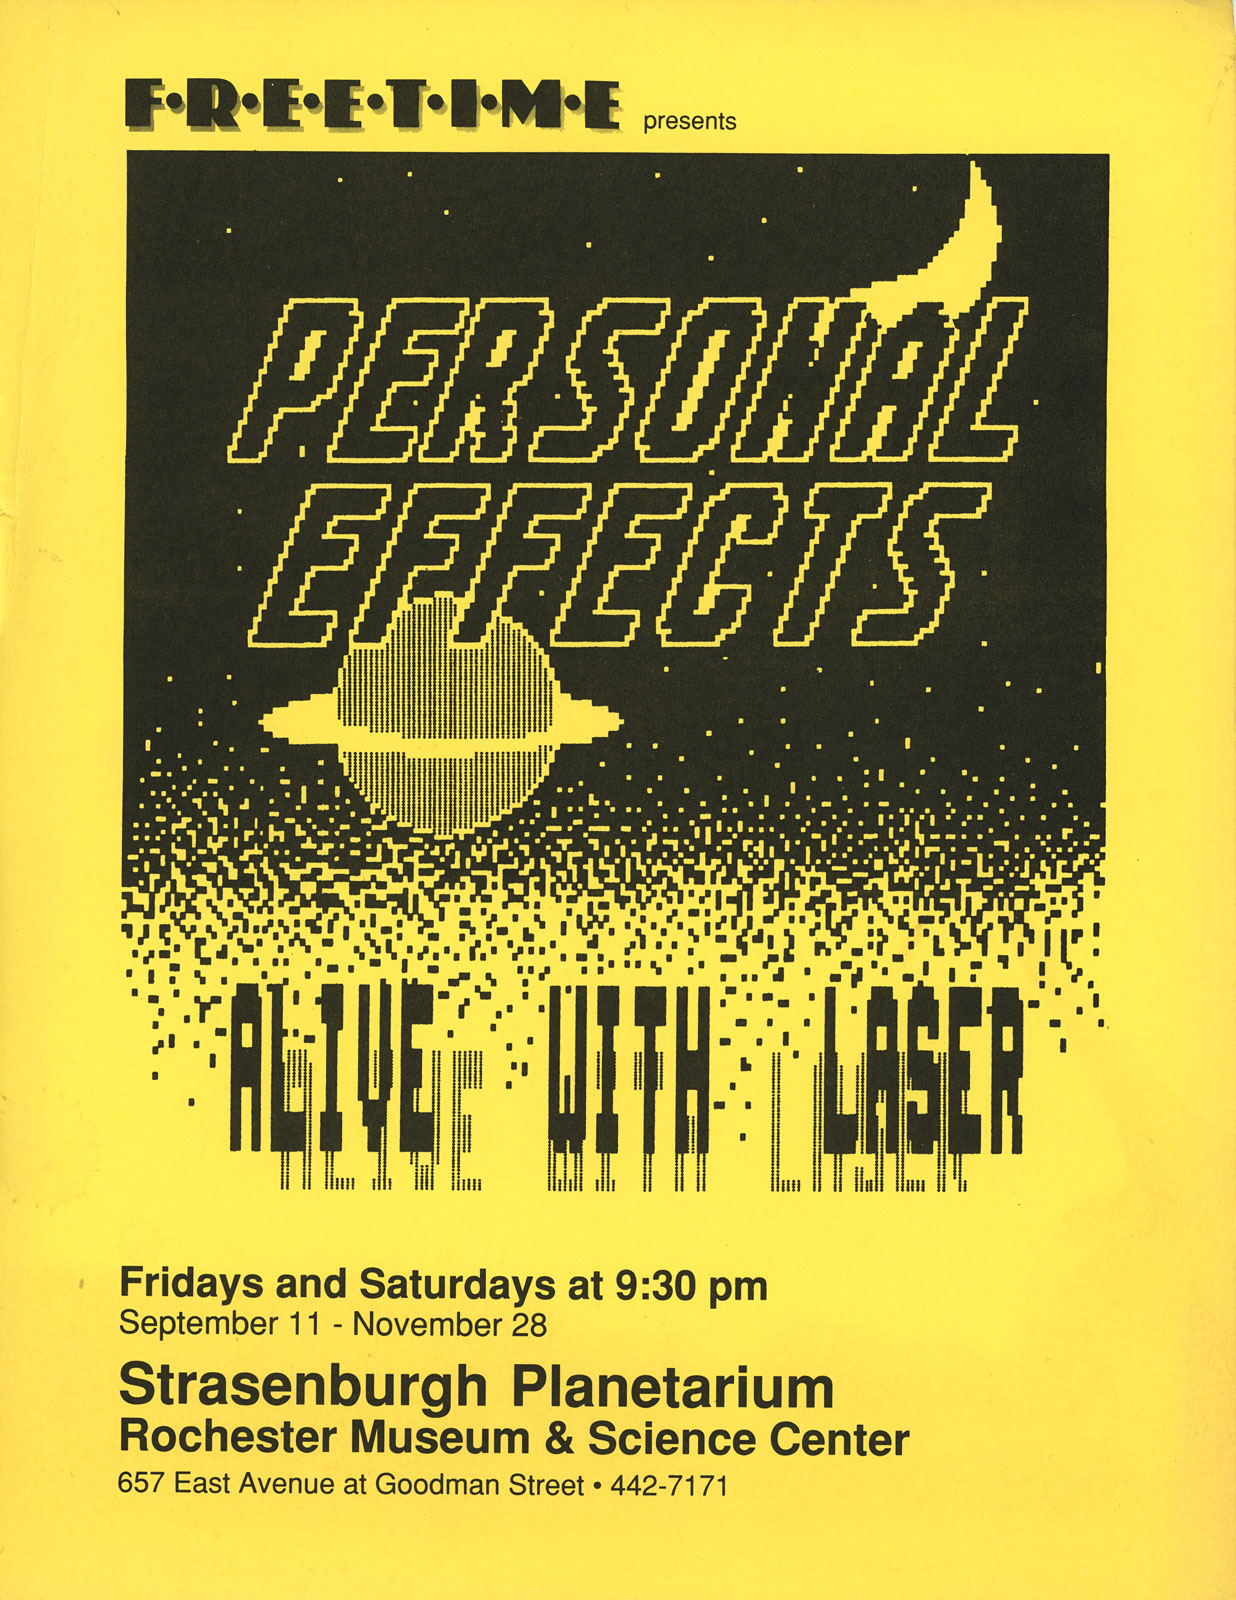 Poster for Personal Effects at the Planetarium in Rochester, New York. Personal Effects play Fridays and Saturdays, sometimes two shows a night, for three months in 1987. The soundtrack was recorded as "90 Days In The Planetarium."